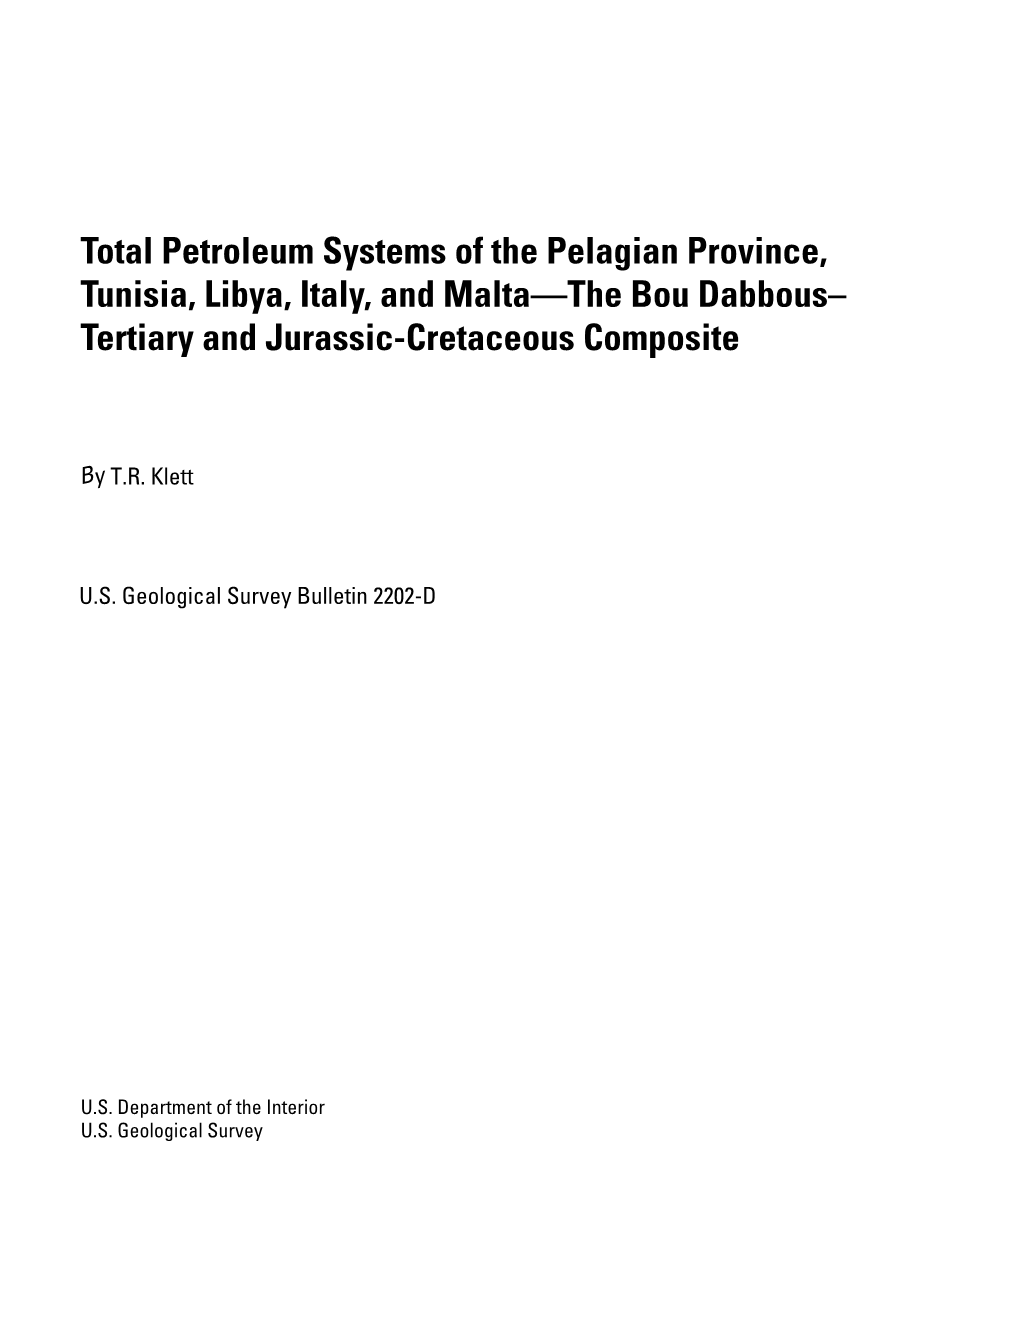 Total Petroleum Systems of the Pelagian Province, Tunisia, Libya, Italy, and Malta—The Bou Dabbous– Tertiary and Jurassic-Cretaceous Composite